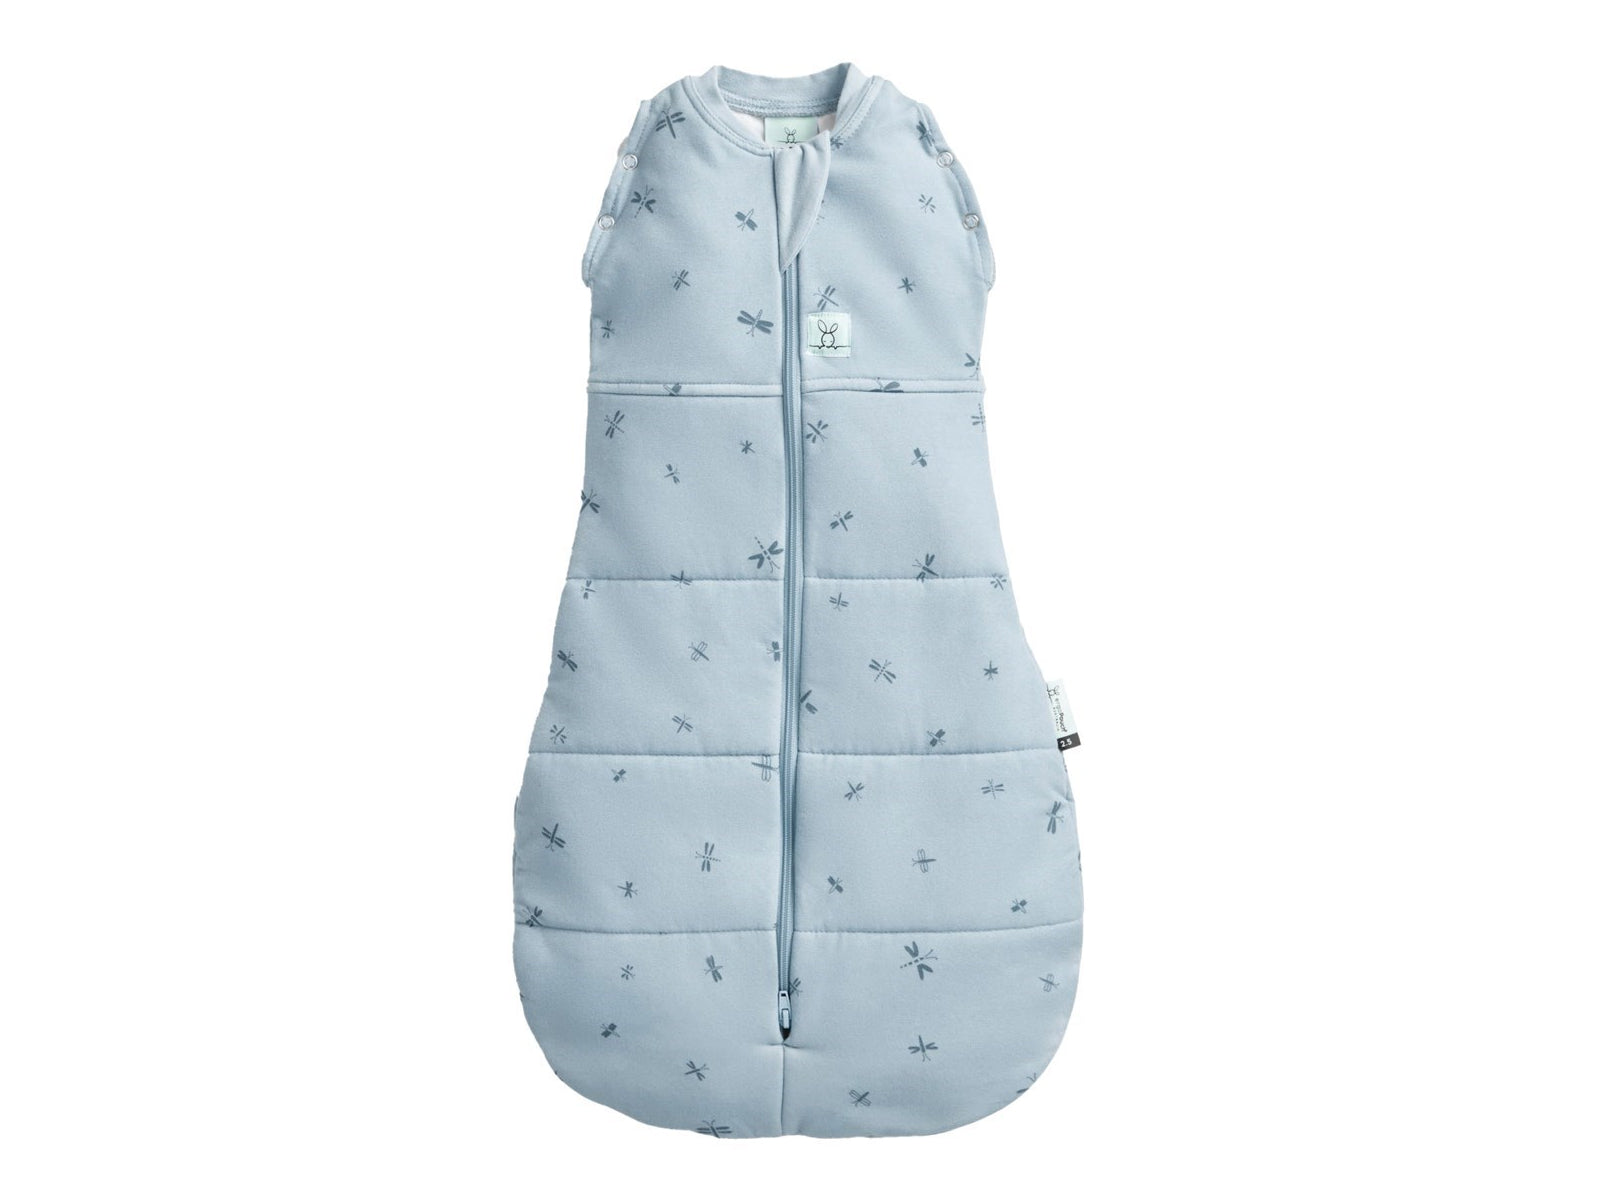 Blue &#39;cocoon swaddle&#39; baby sleeping bag with dragonfly pattern